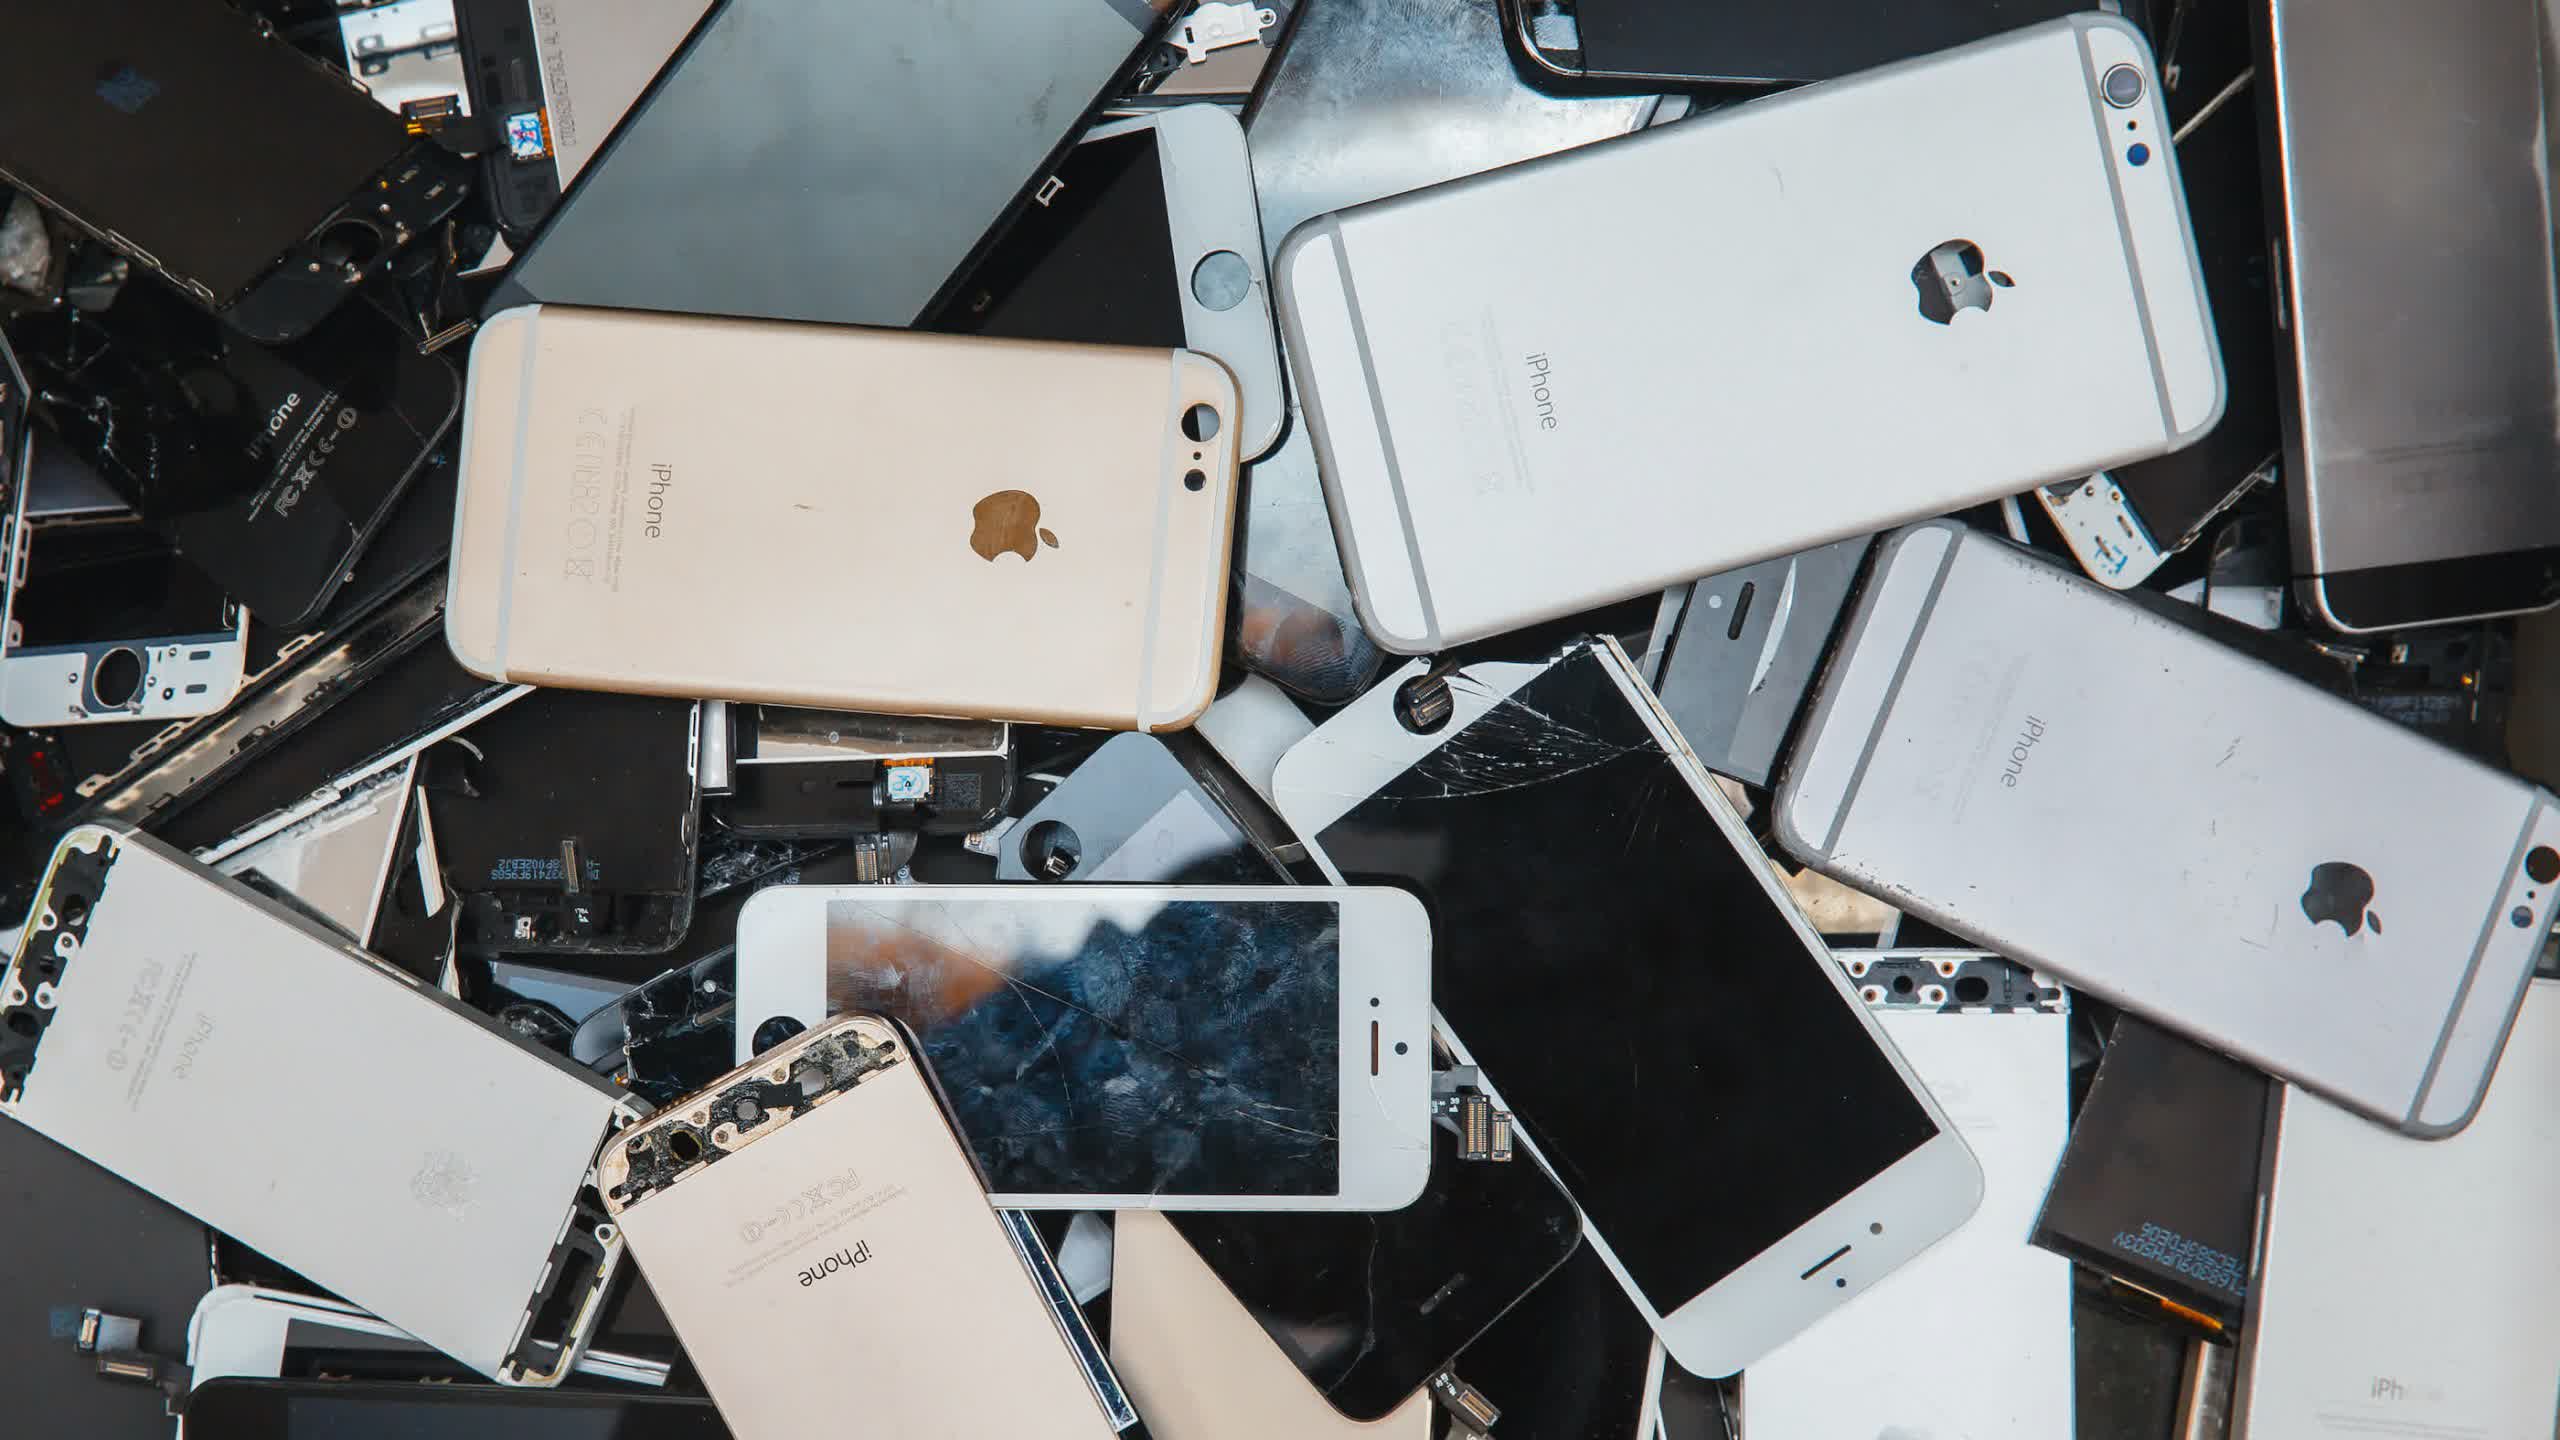 Apple seeks $23 million in damages from contracted recycler for reselling obsolete devices